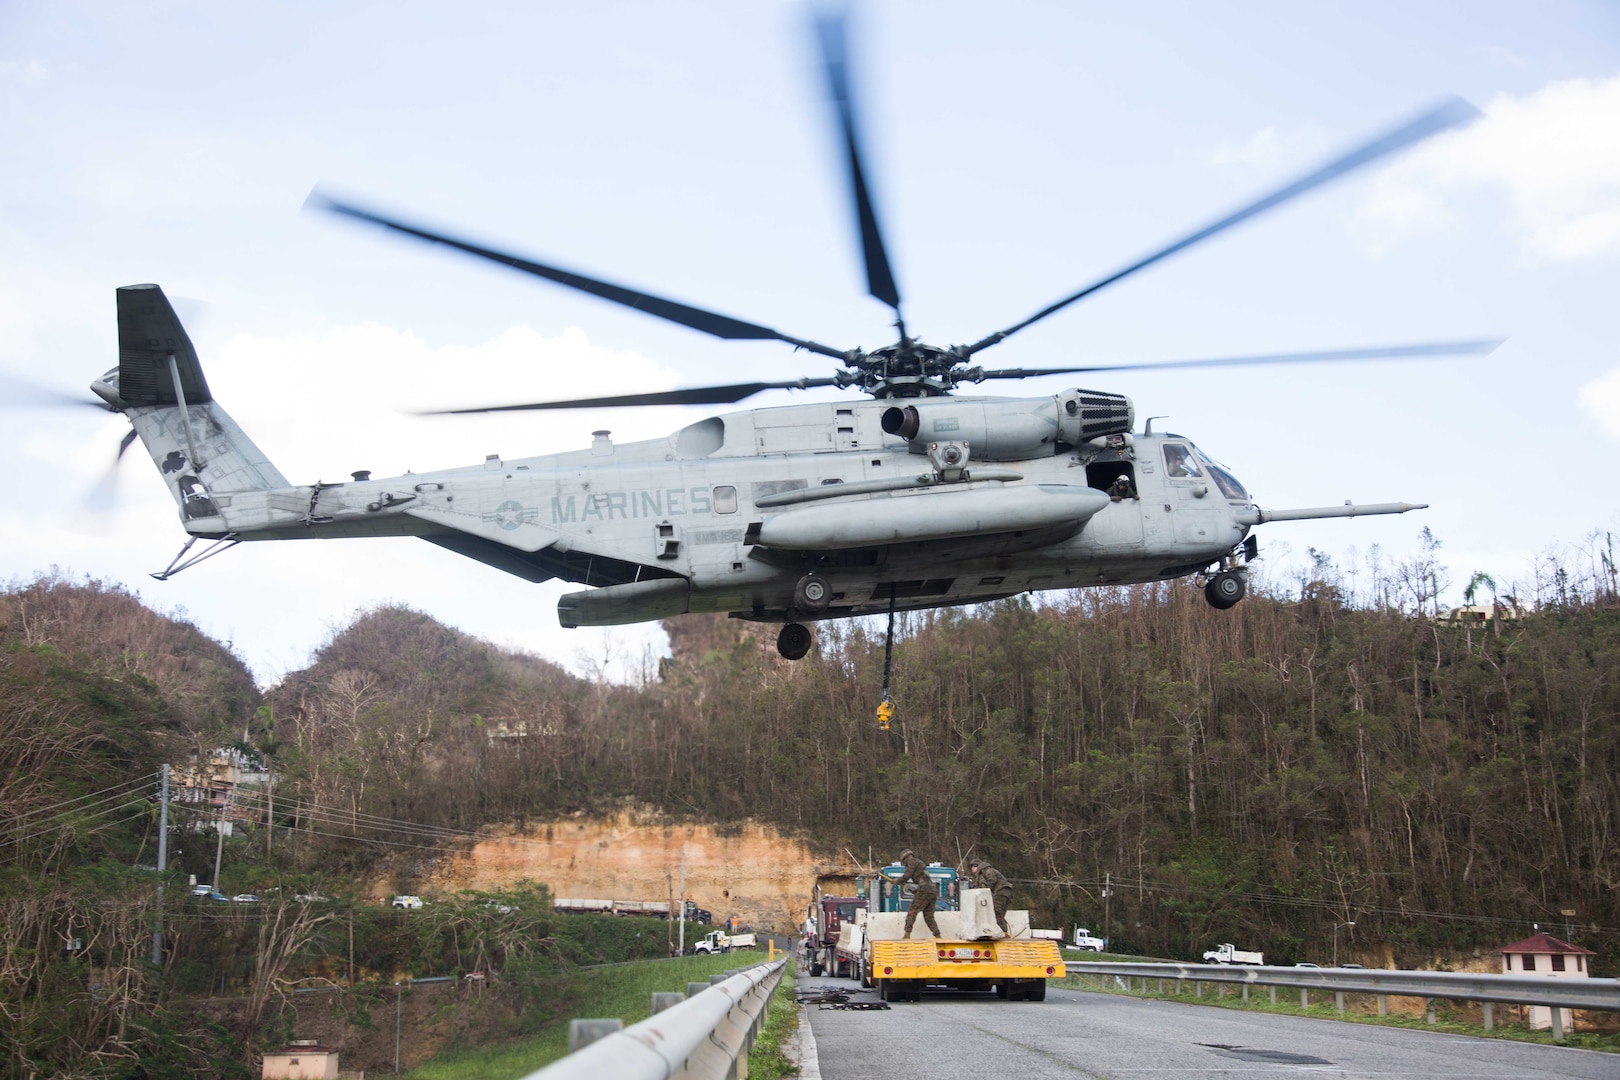 The 26th MEU conducted the HST in order to prevent a dam from collapsing. The MEU is supporting Federal Emergency Management Agency, the lead federal agency, in helping those affected by Hurricane Maria in Puerto Rico to minimize suffering and is one component of the overall whole-of-government response effort.